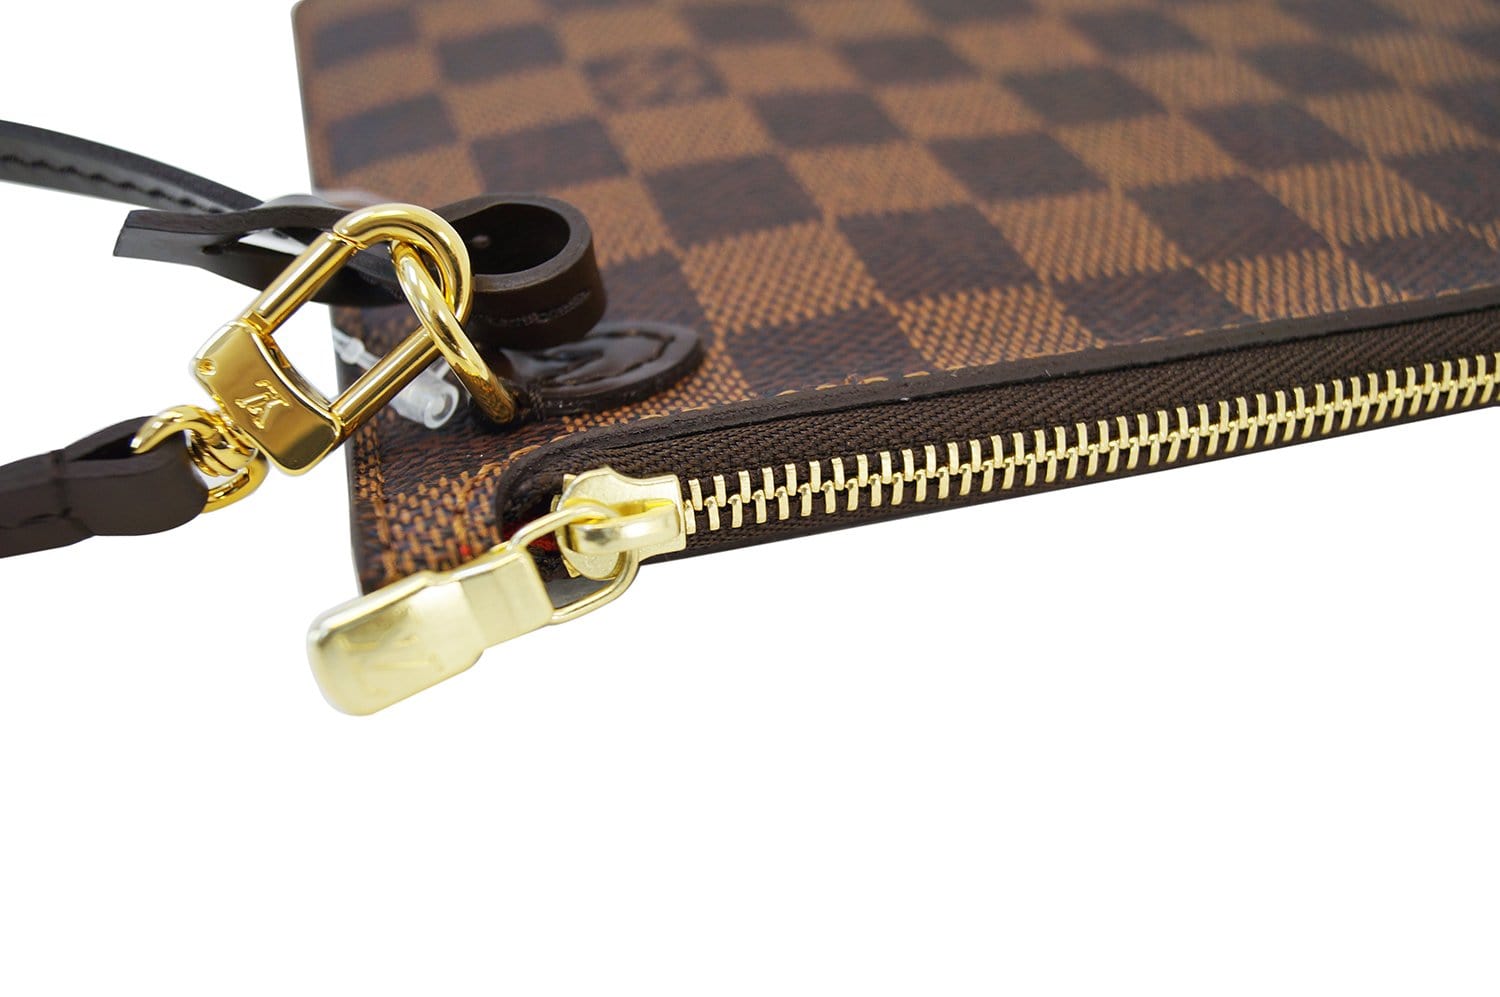 Louis Vuitton POCHETTE NEVERFULL – The Brand Collector